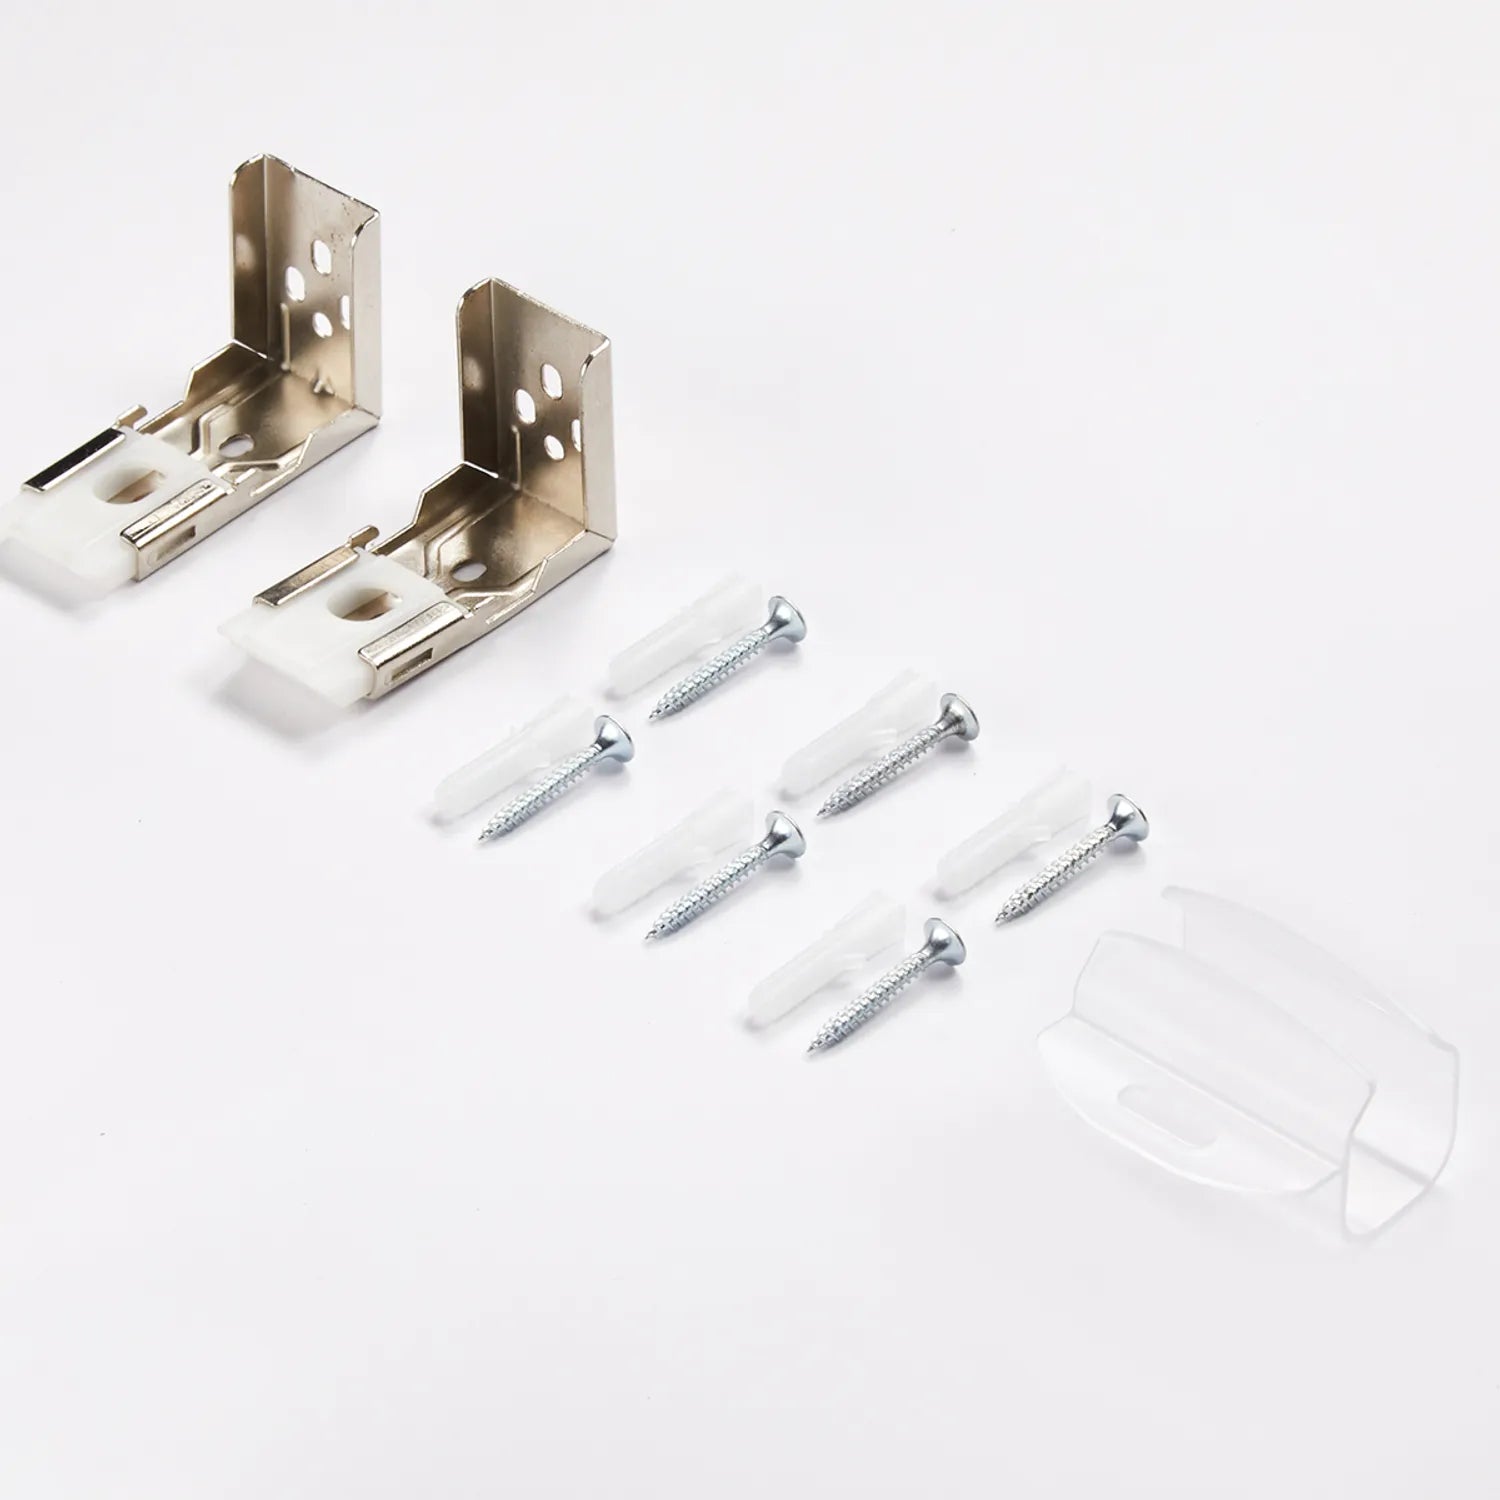 Mounting hardware set for window treatments including metal brackets, screws, and plastic anchors